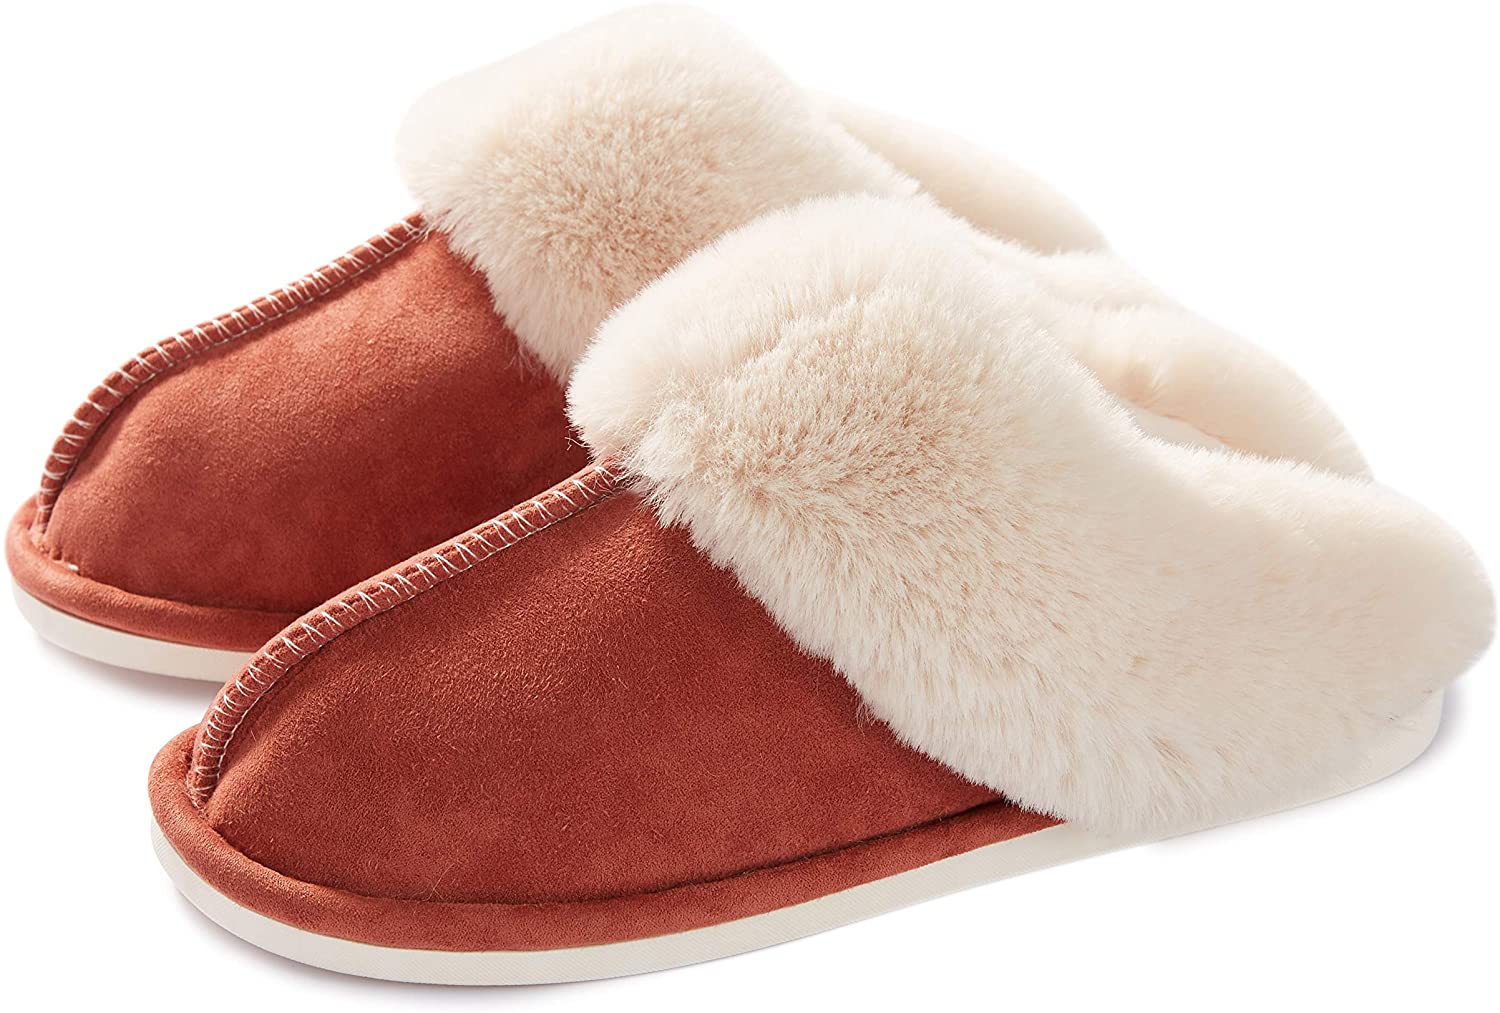 Designer Tasman Slippers Australian Fluffy Platform Shoes For Women Classic  Casual Autumn Kids Snow Boots With Wool Scuffs Perfect For Outdoor  Activities Style 2329 From Starshoes886, $25.53 | DHgate.Com